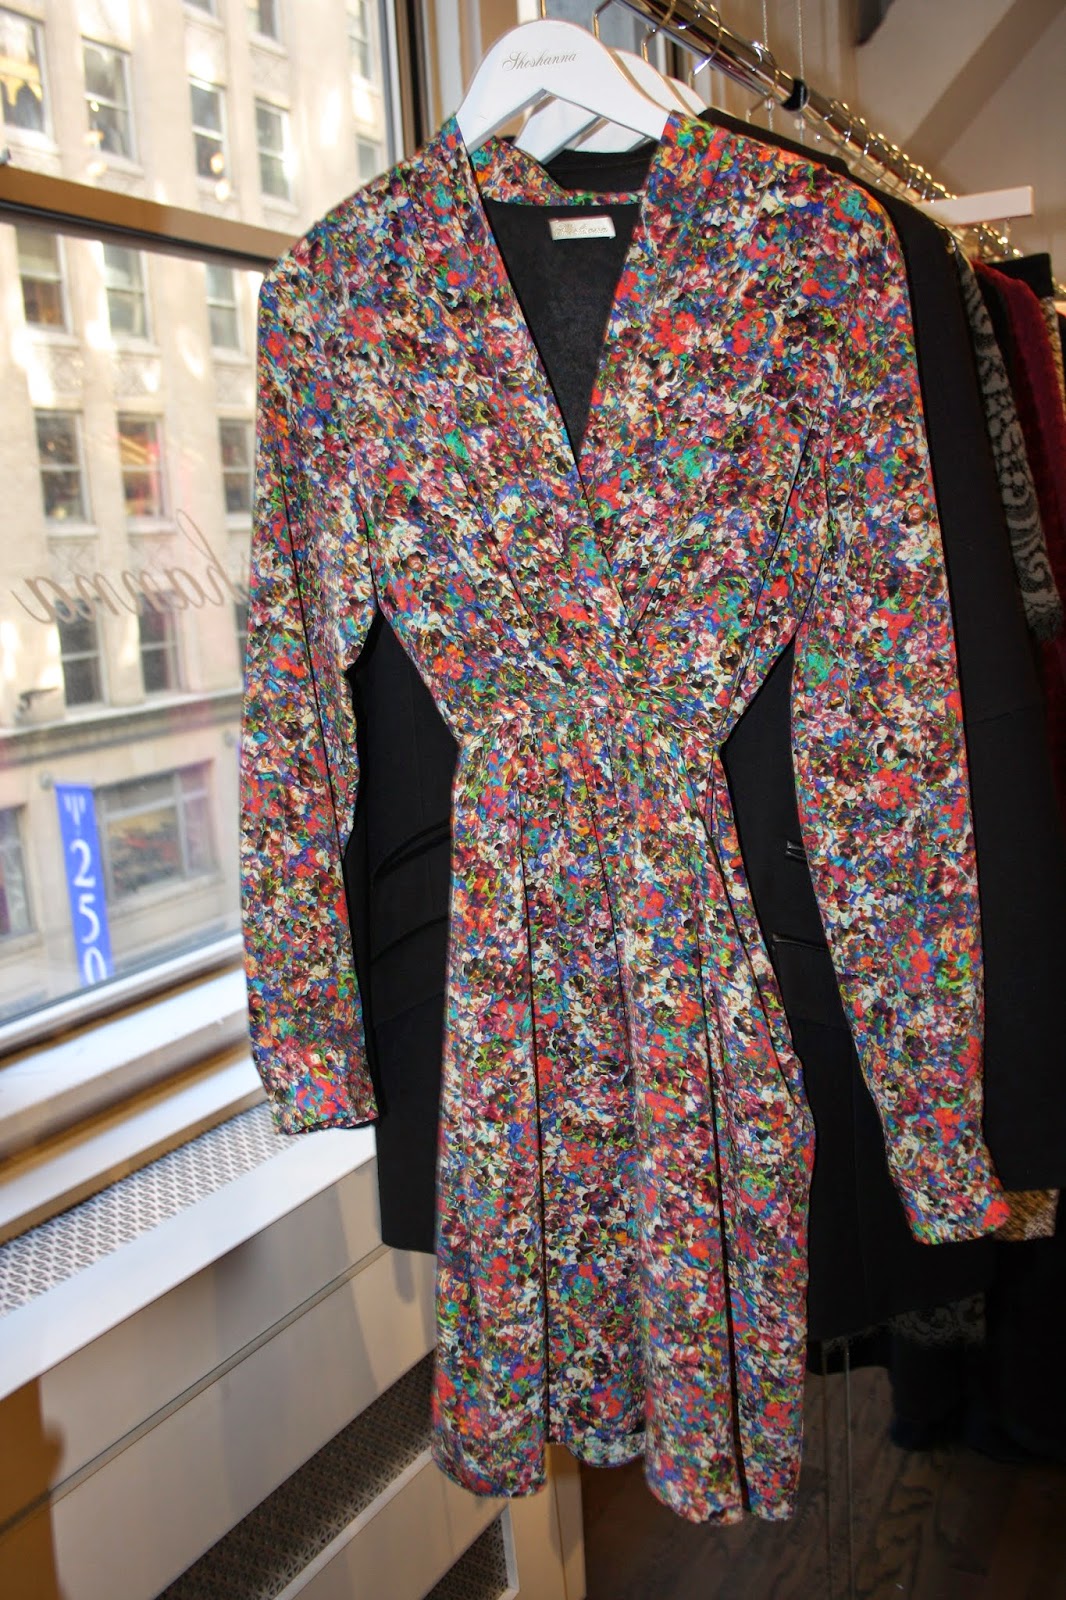 Market Appointment: Shoshanna Fall 2014 Preview